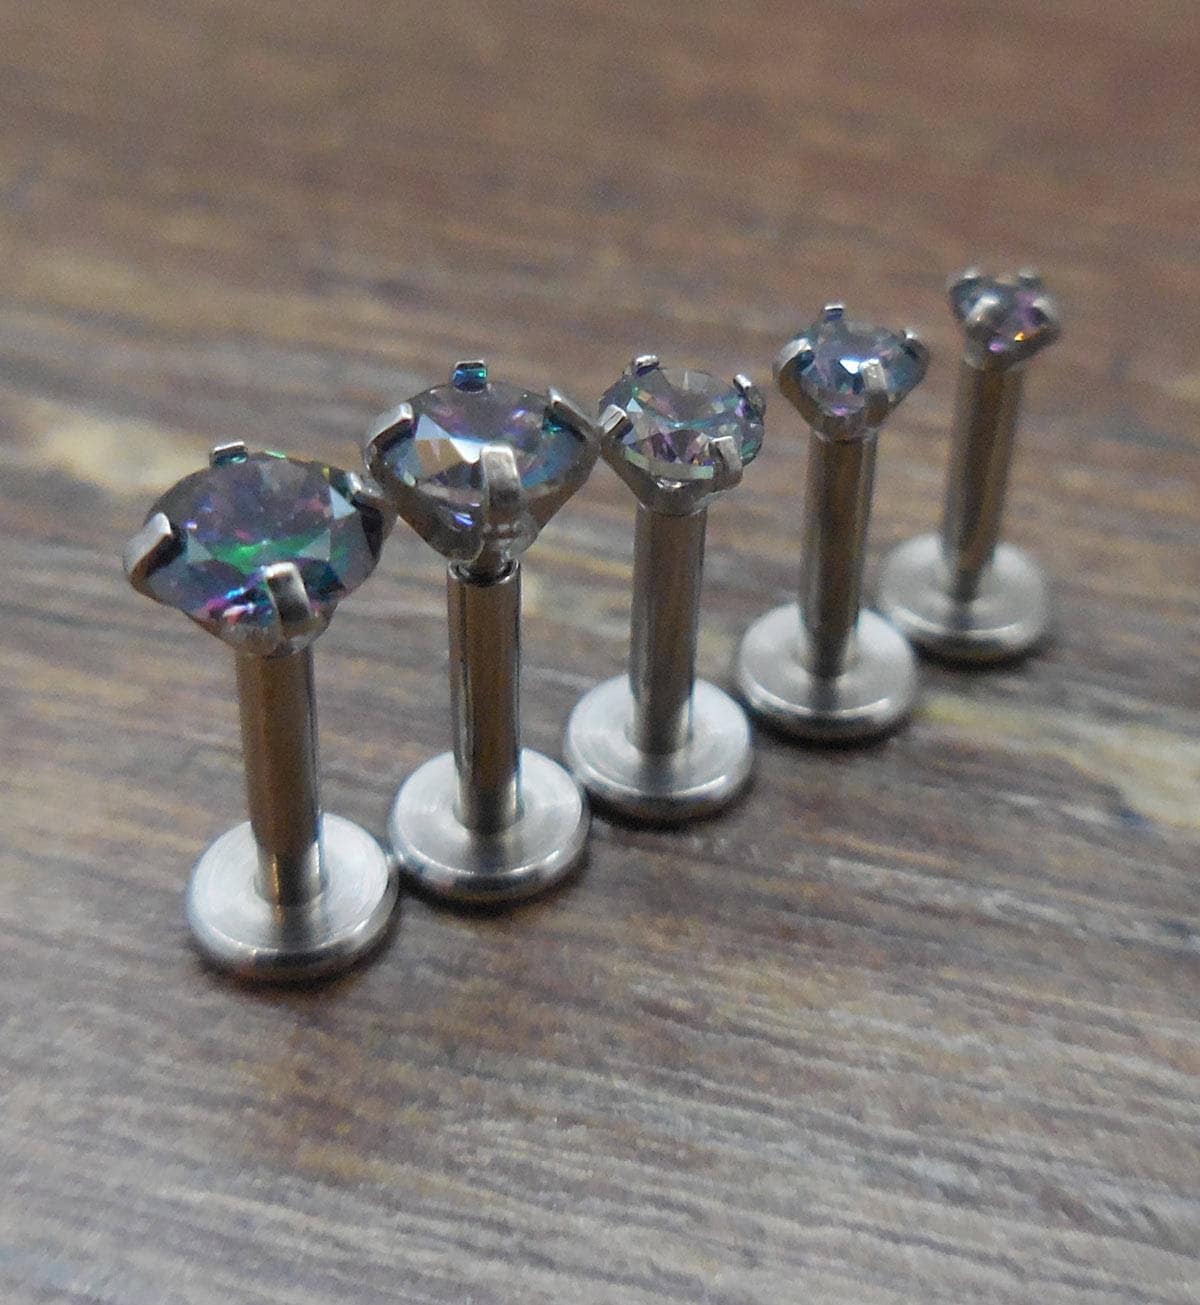 16G 2-4mm Unique Dark Prism Earrings Cartilage Jewelry Stud Stainless Steel